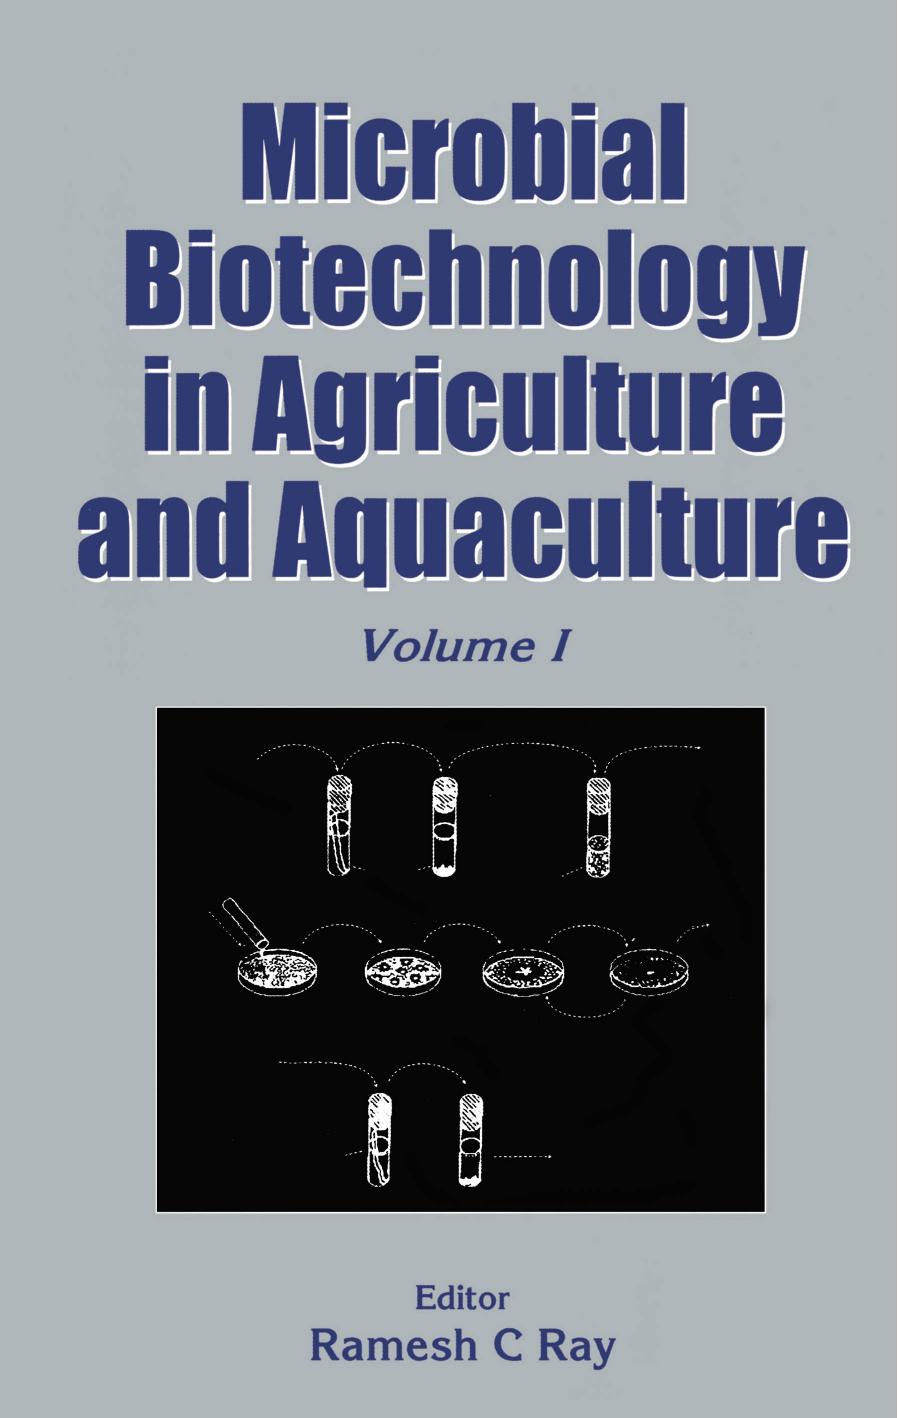 Microbial Biotechnology in Agriculture and Aquaculture, Vol. 1